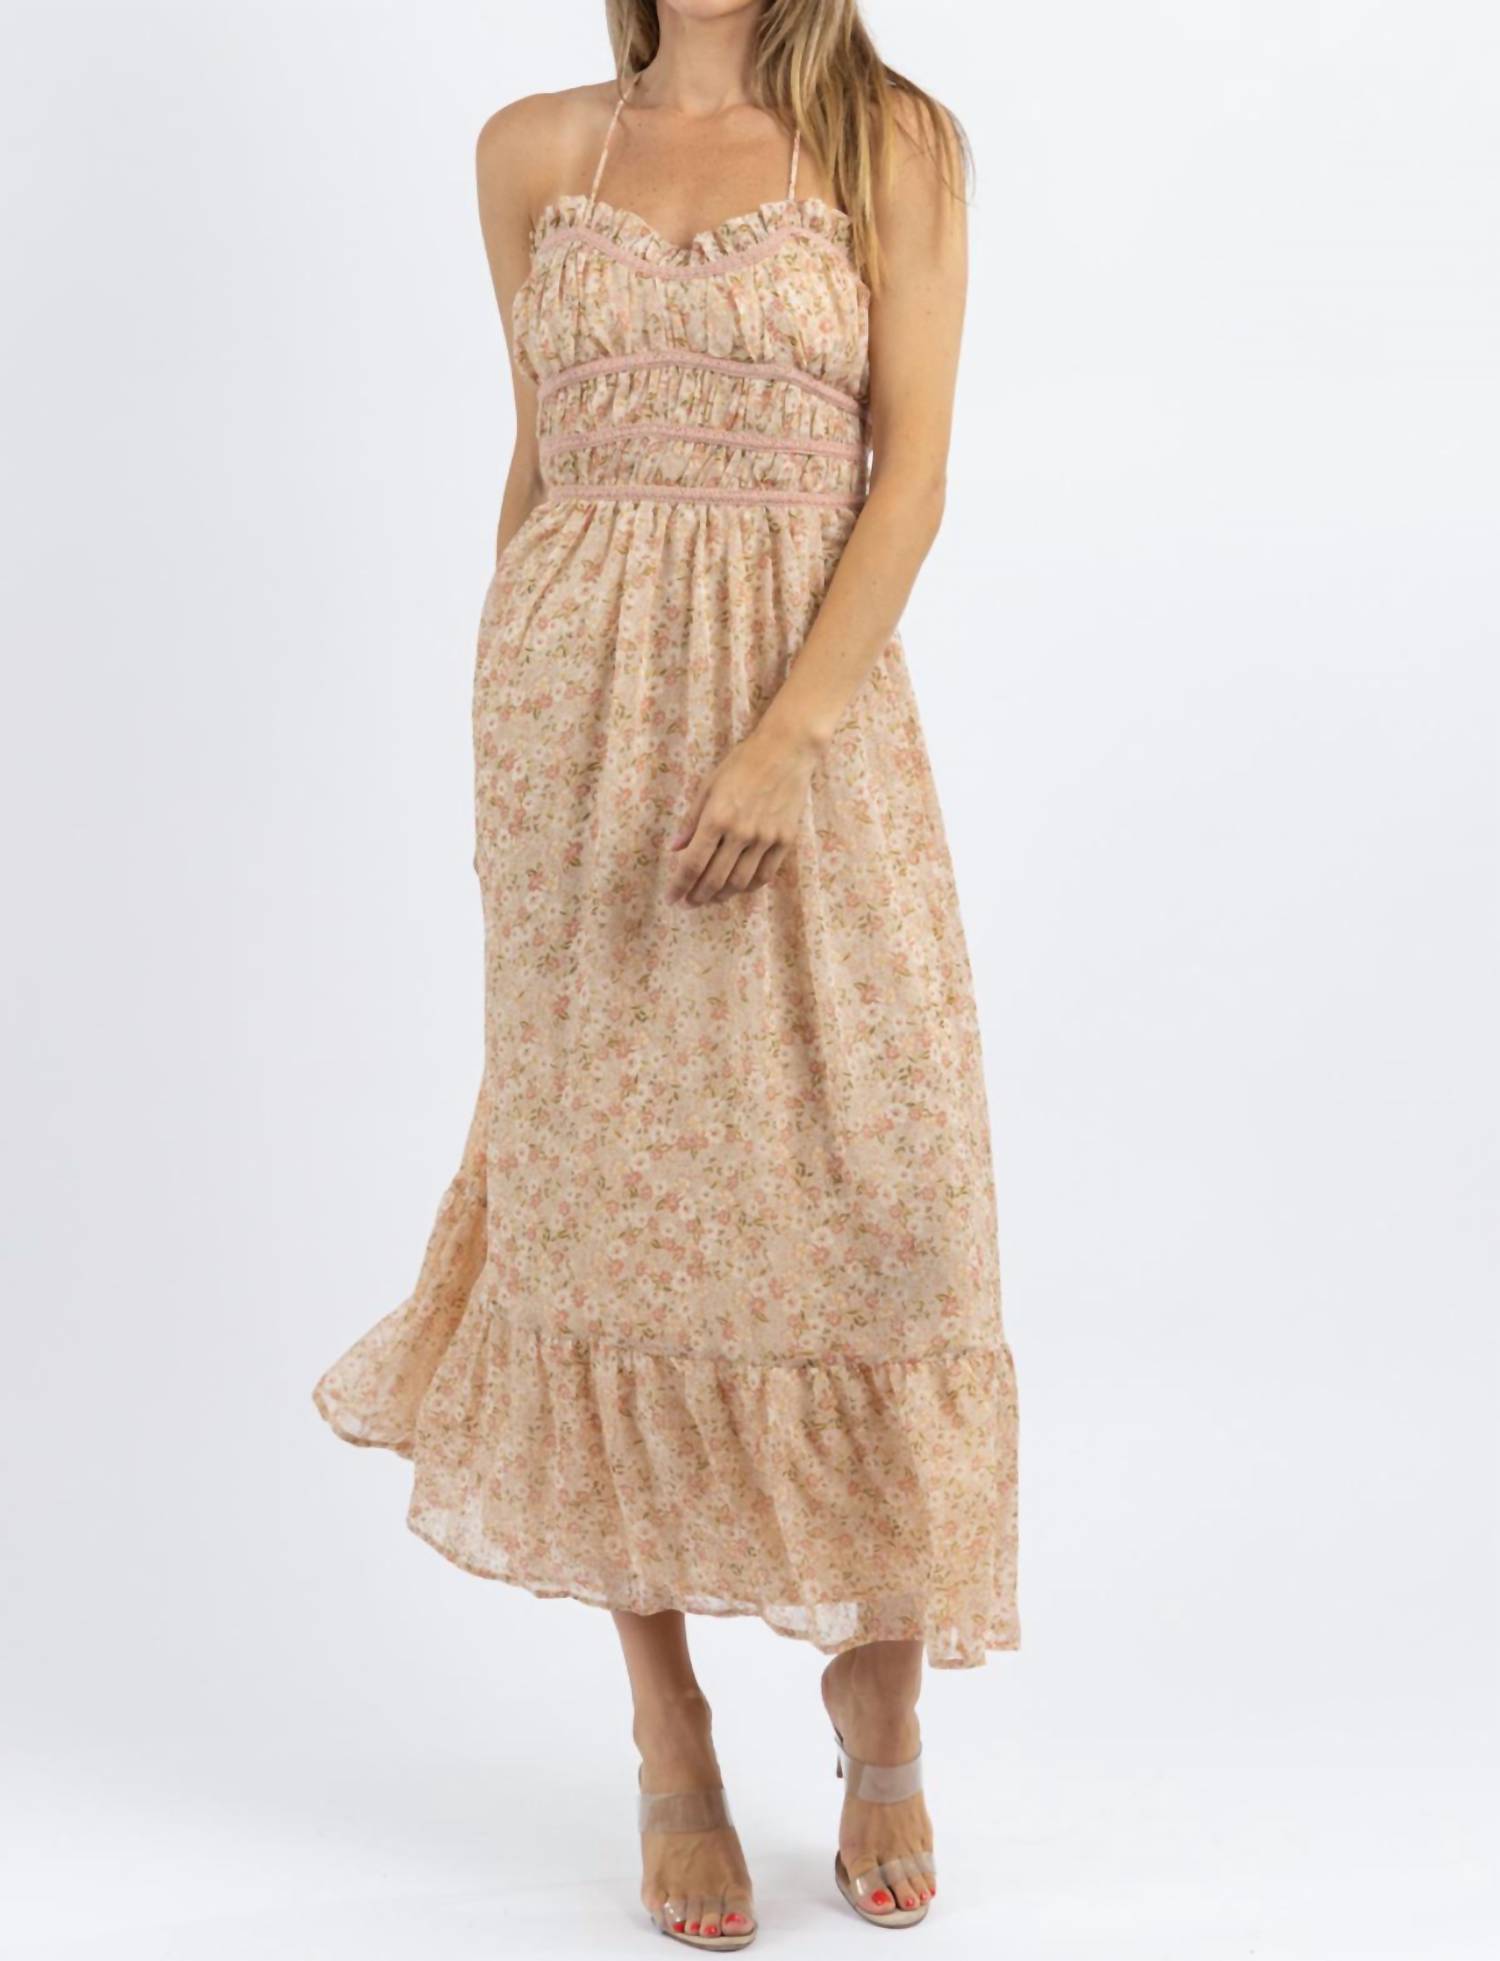 Dress Forum Floral Maxi Dress In Bluebell Blush